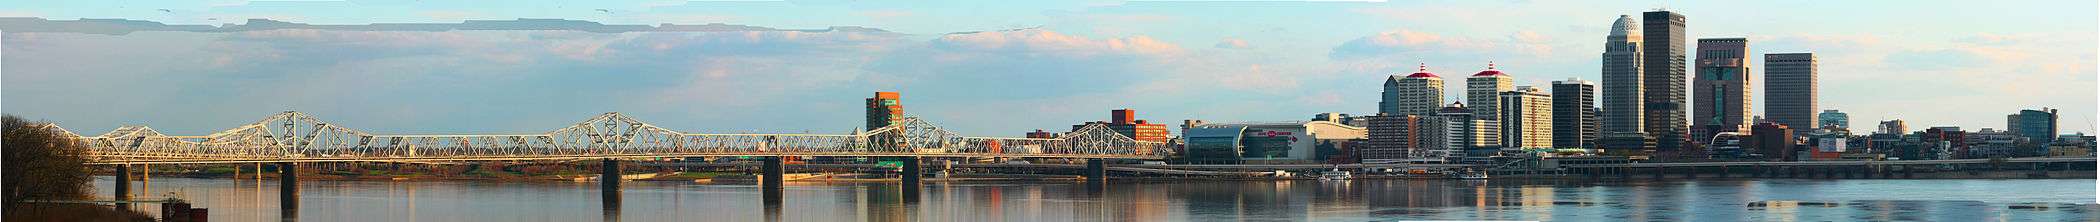 Louisville Panorama from Jeffersonville, Indiana. Second St Bridge on the foreground